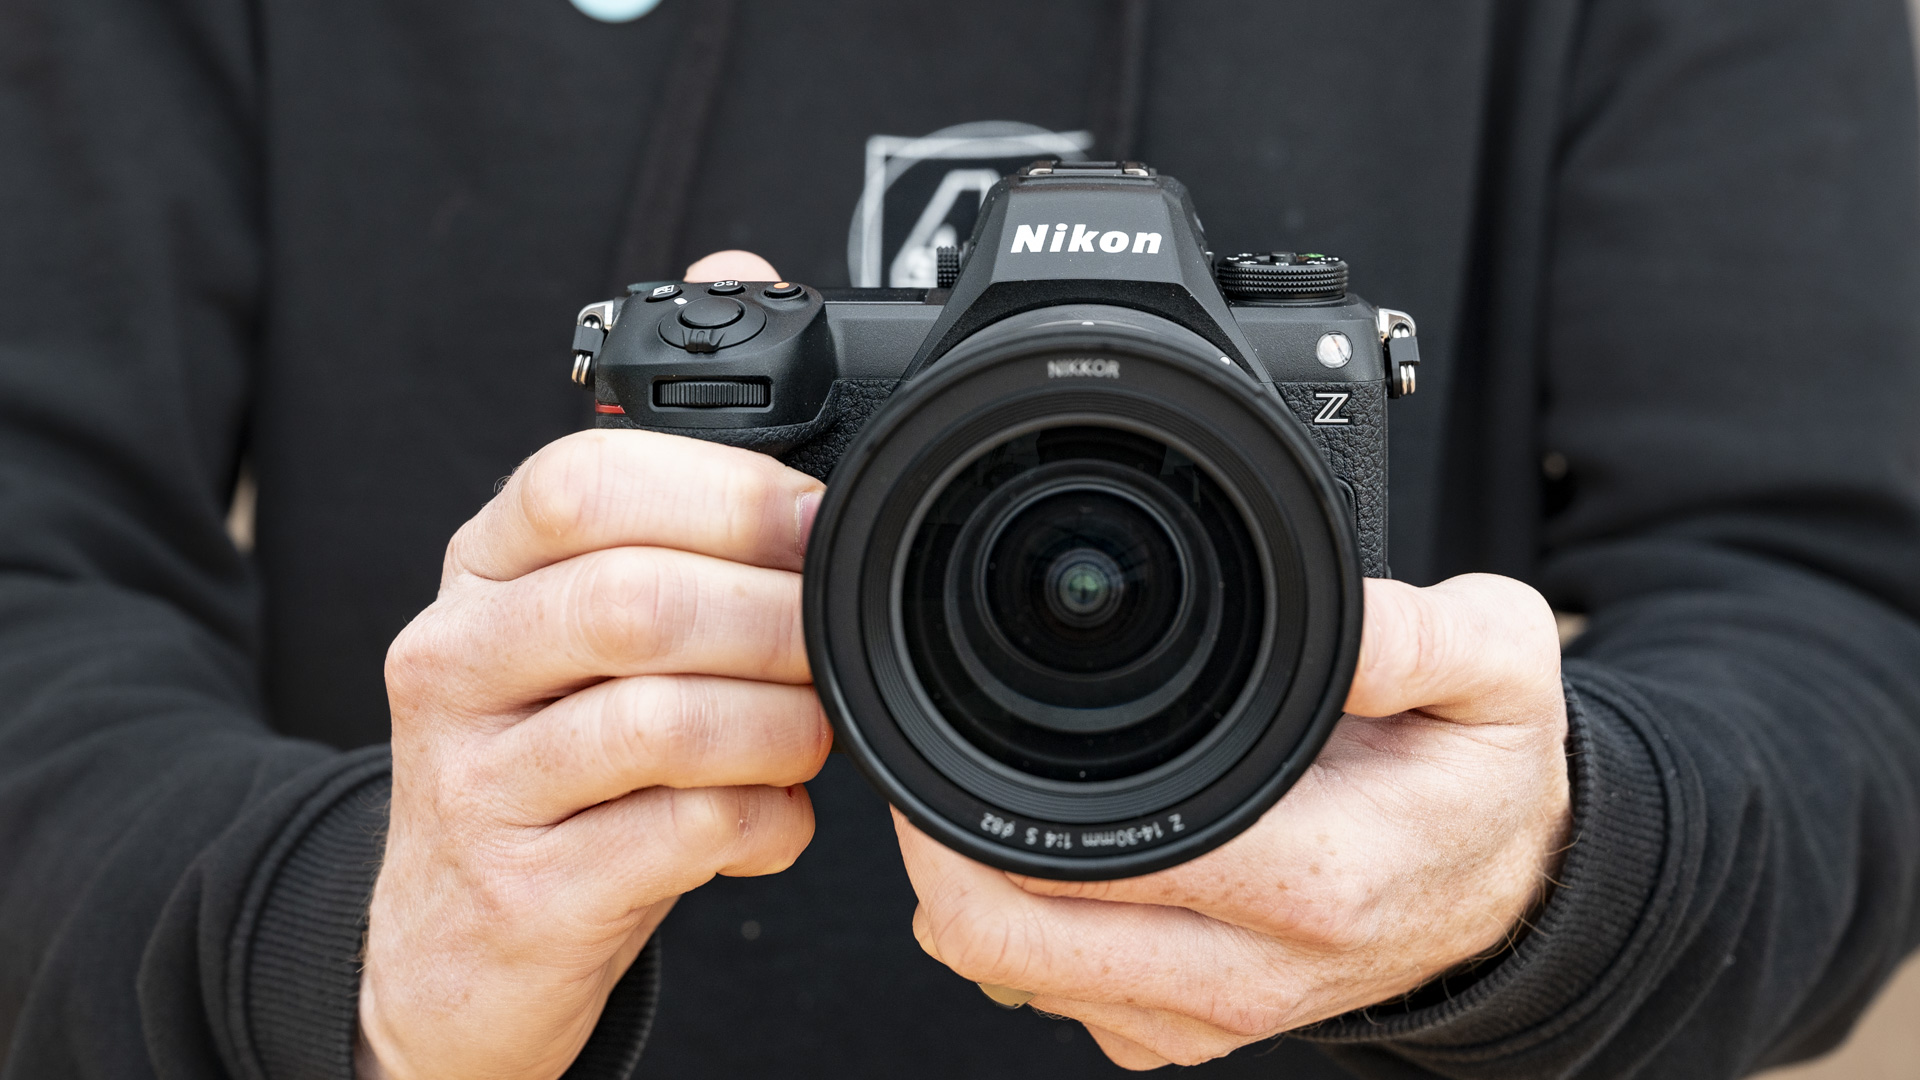 Nikon Z6 III camera in the hand, front on